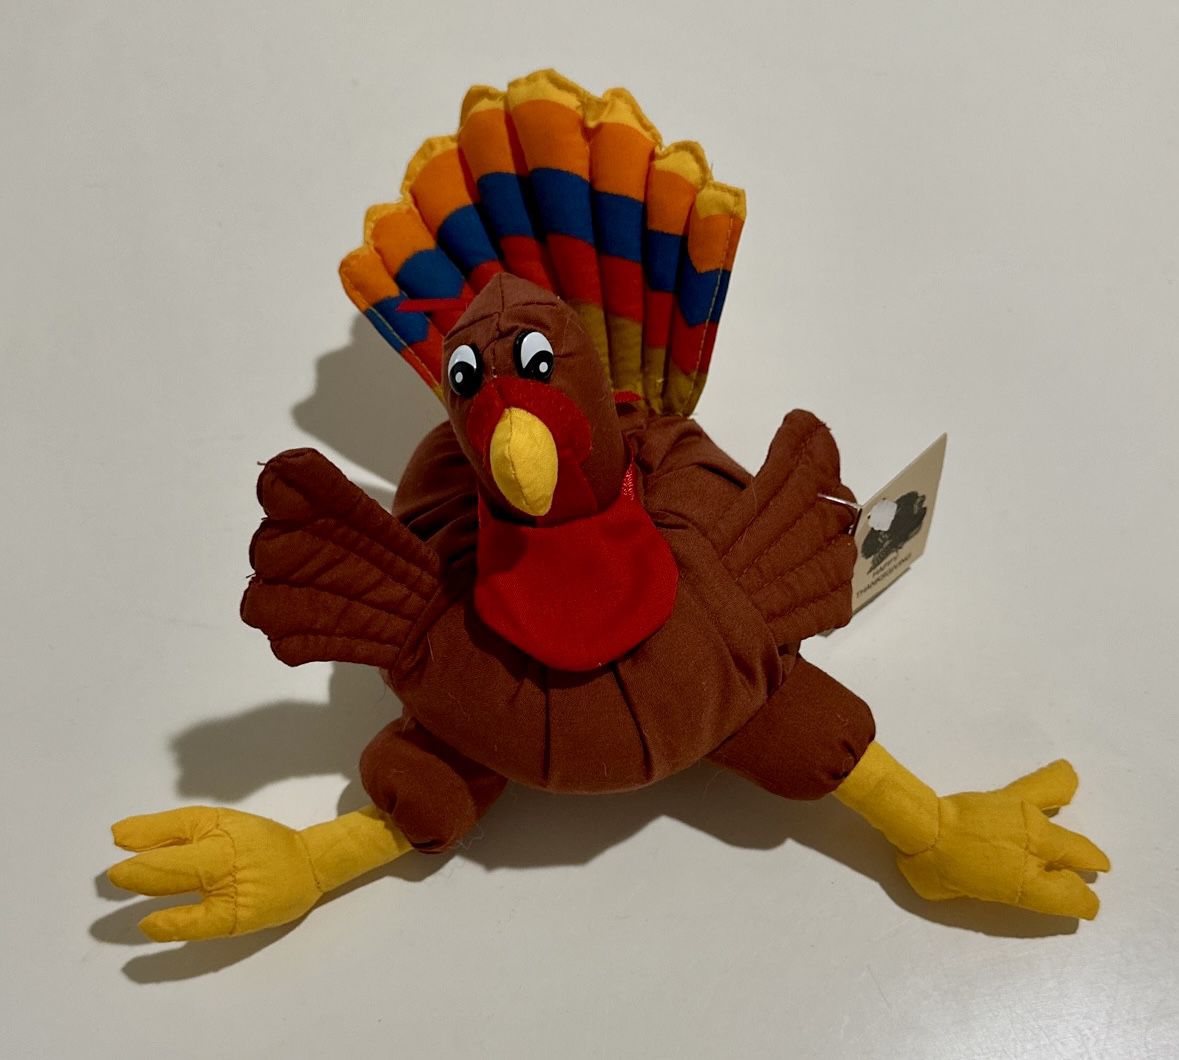 Vintage Plush Stuffed Sitting Turkey Quilted Tail Thanksgiving Fall 6"